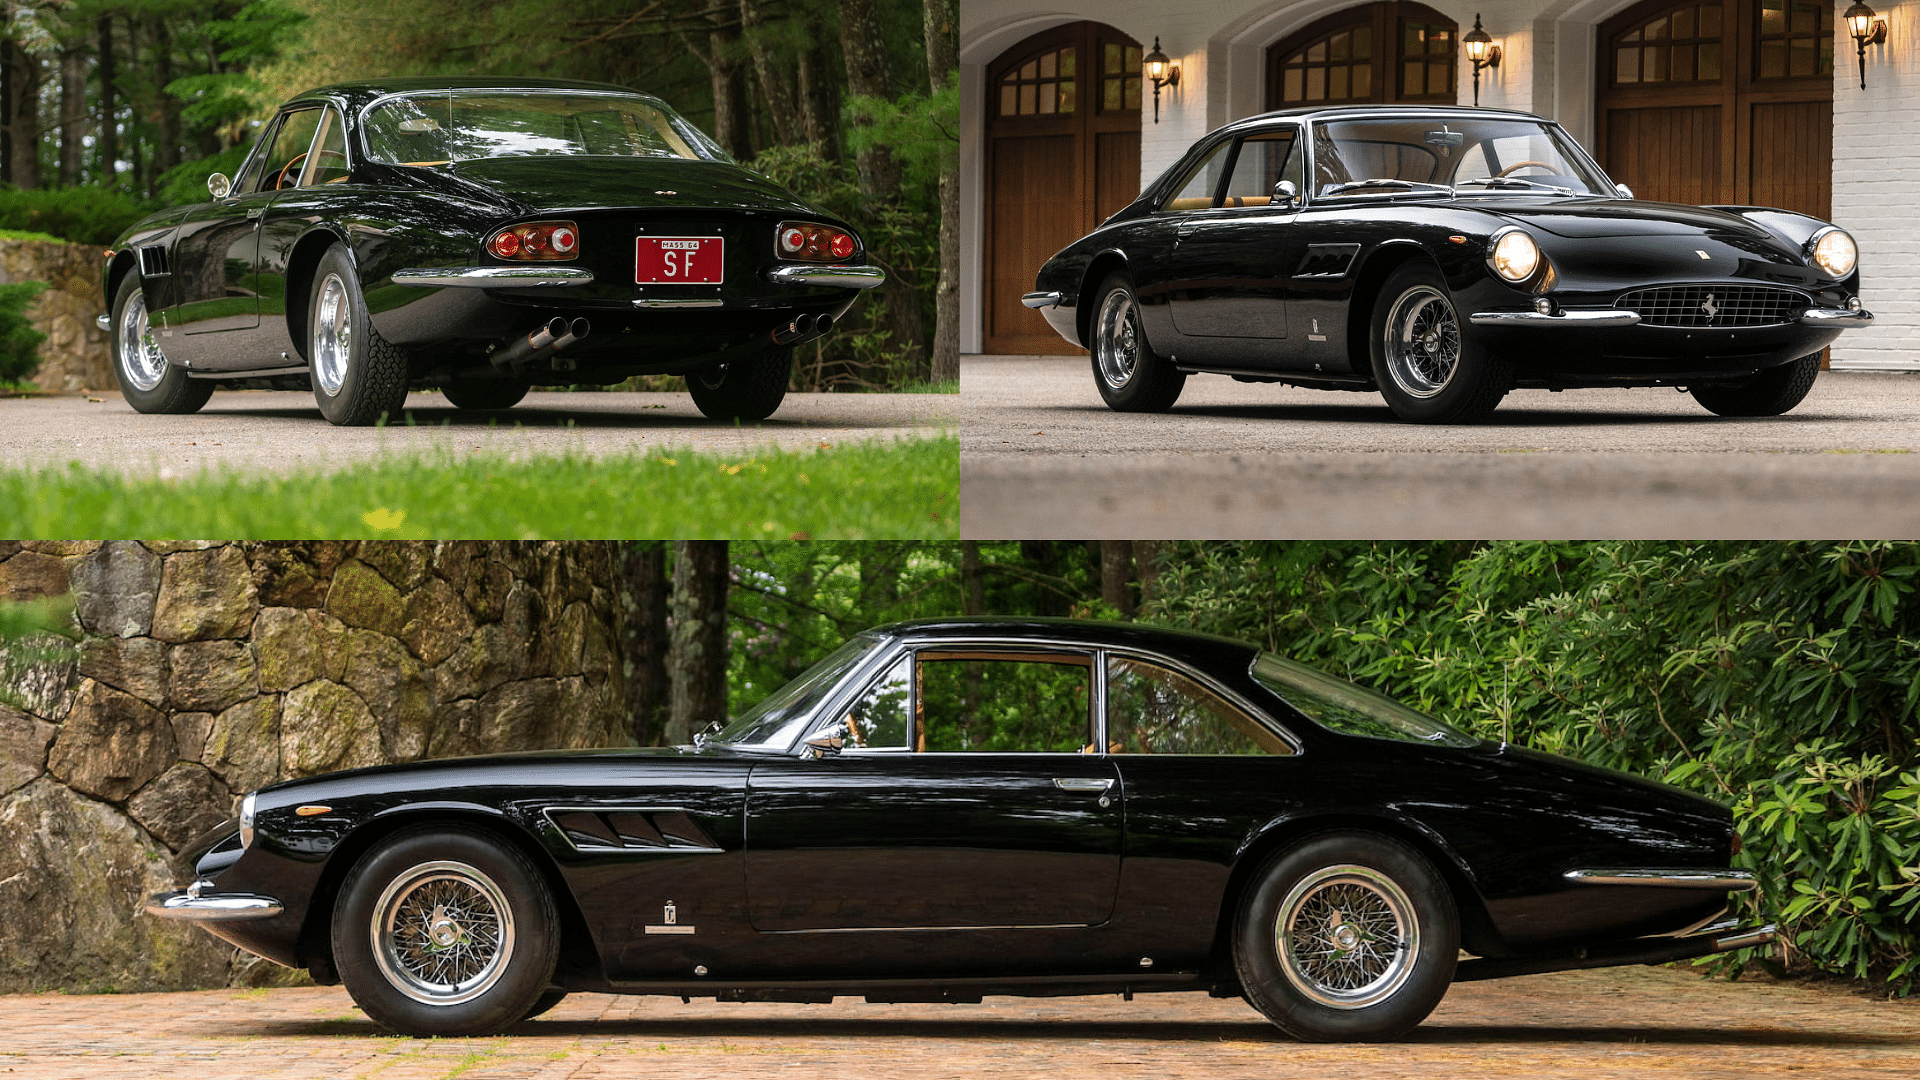 The Ferrari 500 Superfast in Black exterior, front, rear, and side view